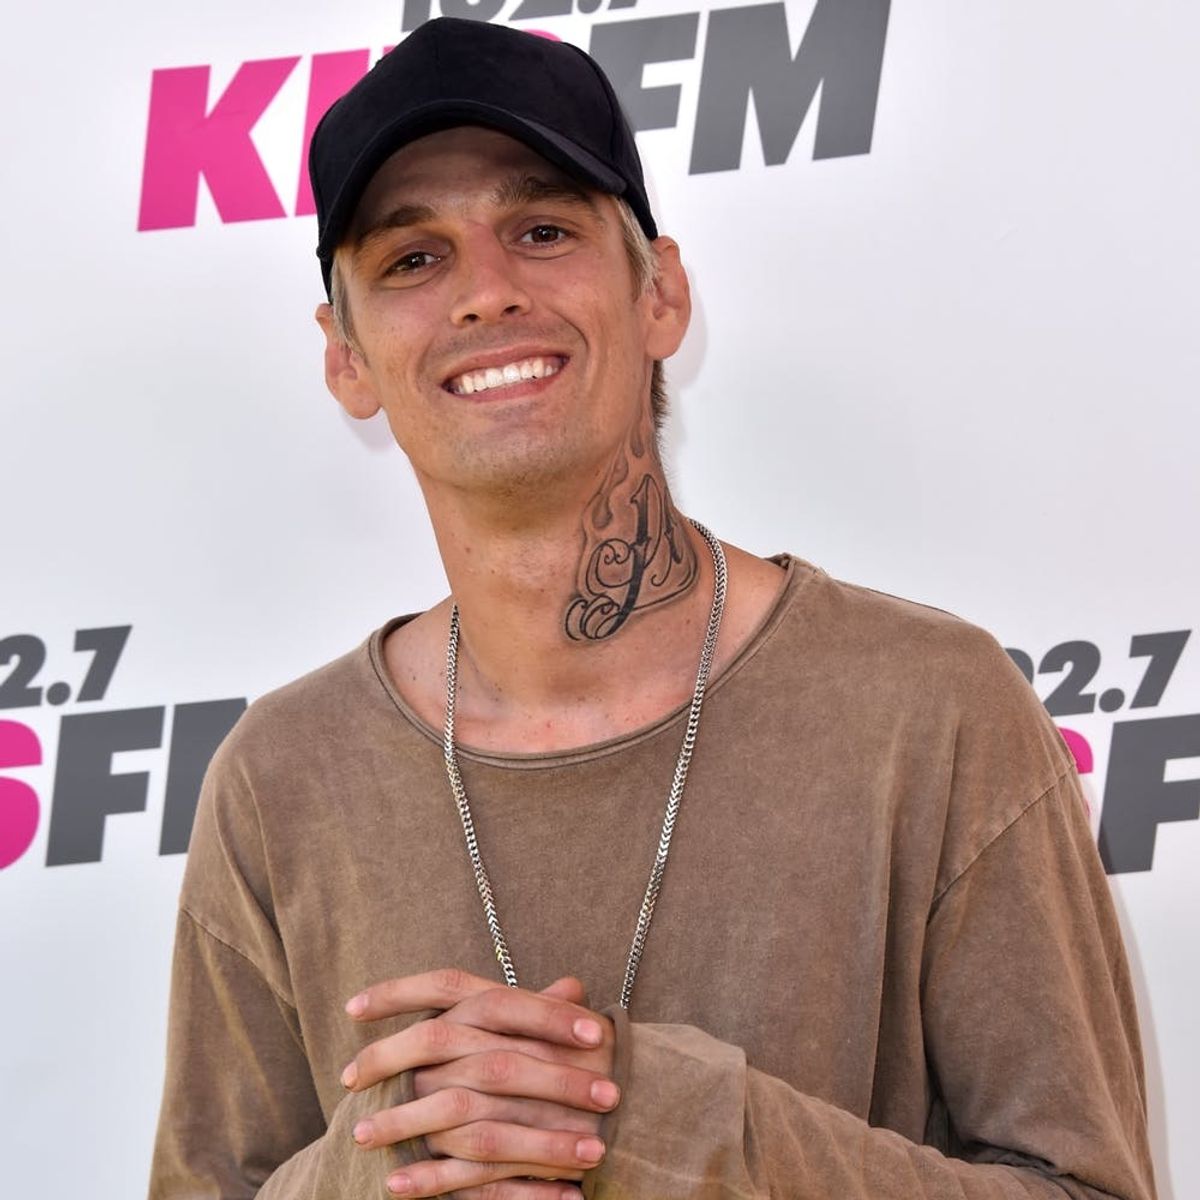 Aaron Carter Explains Decision to Enter Rehab to “Improve His Health”